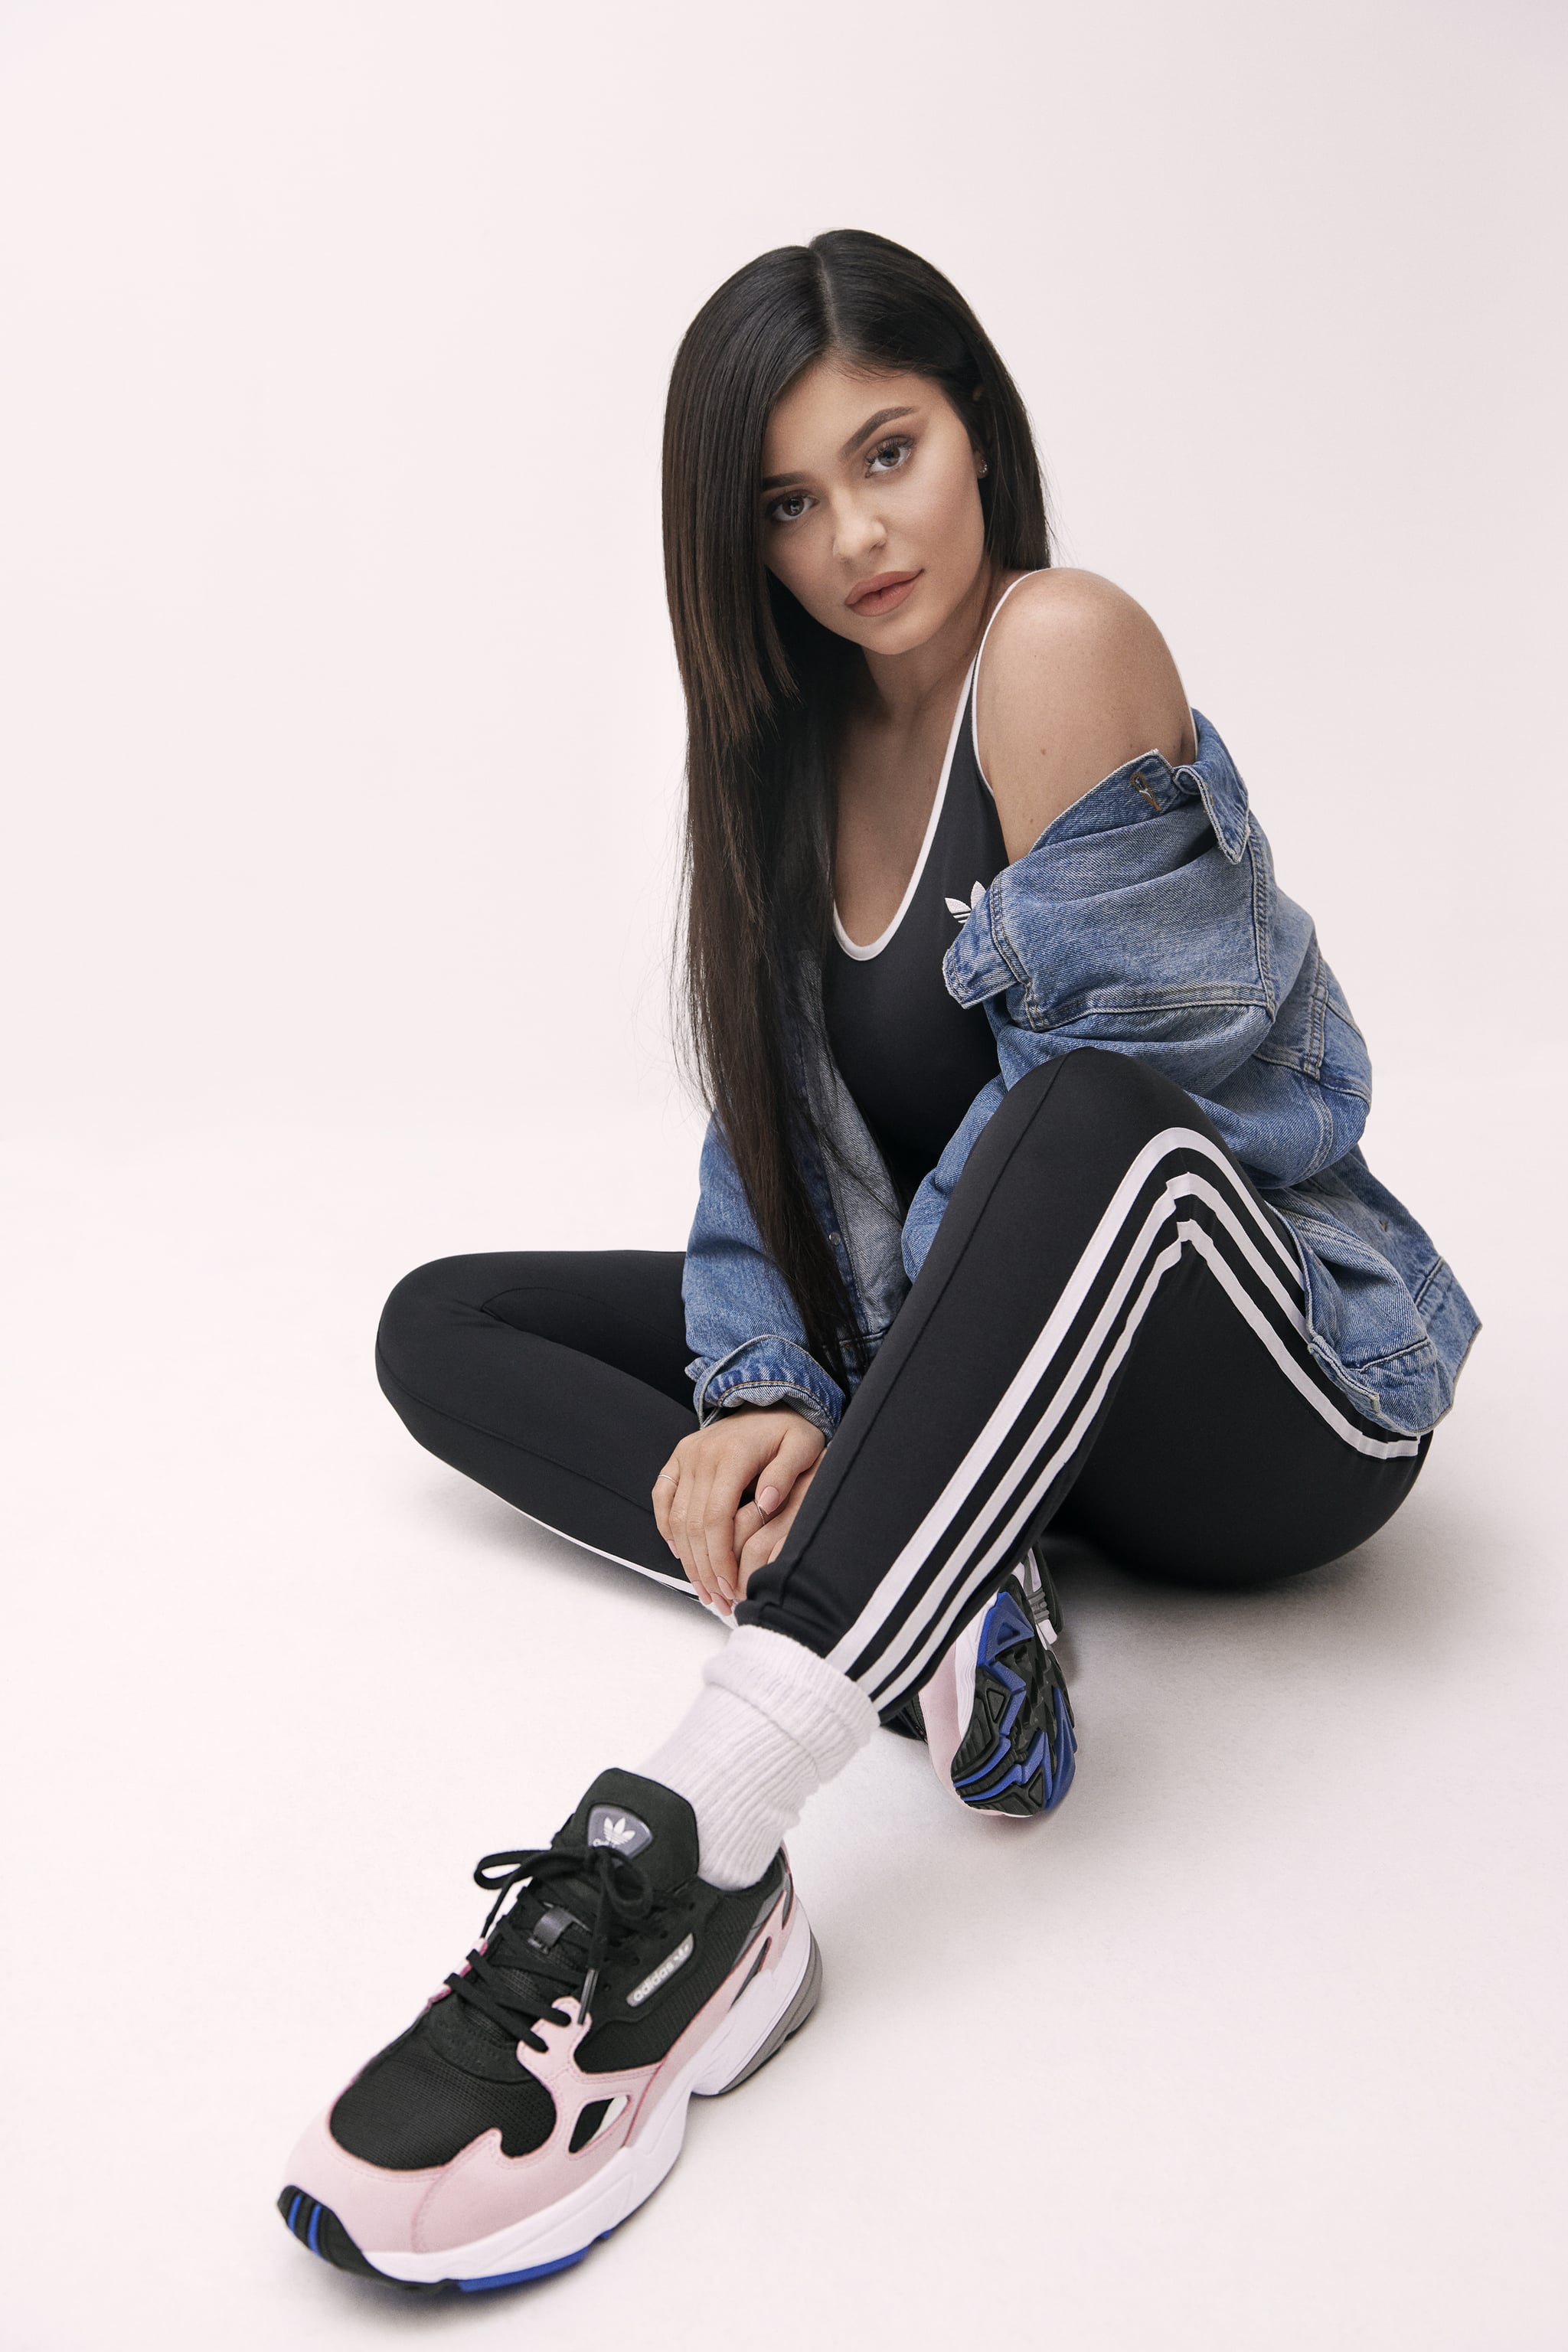 kylie jenner adidas shoes 2018